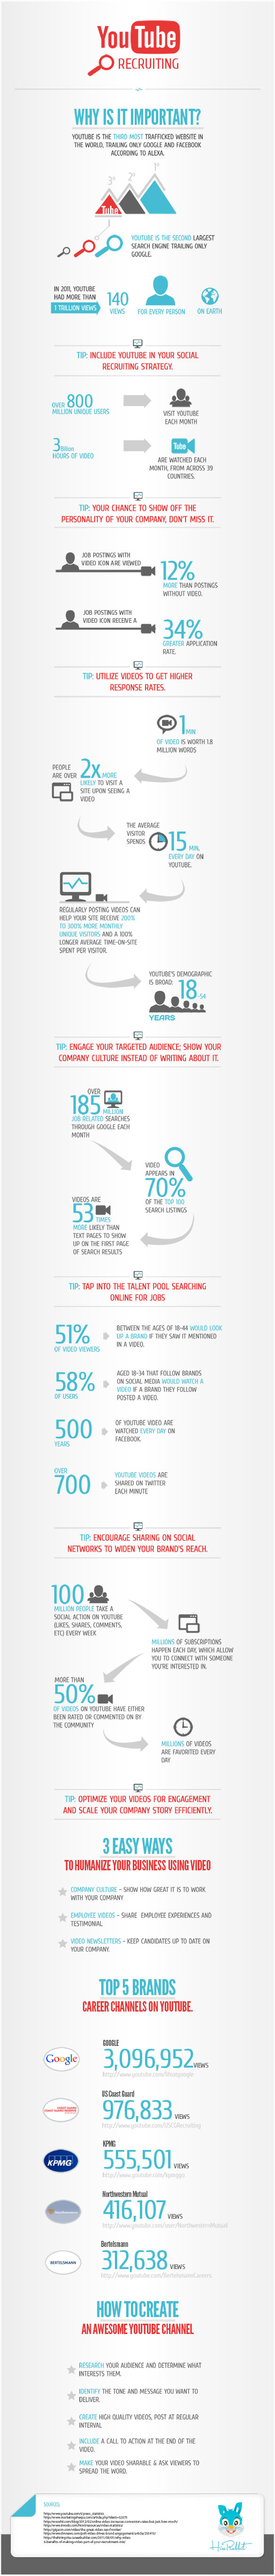 YouTube for recruiting infographic